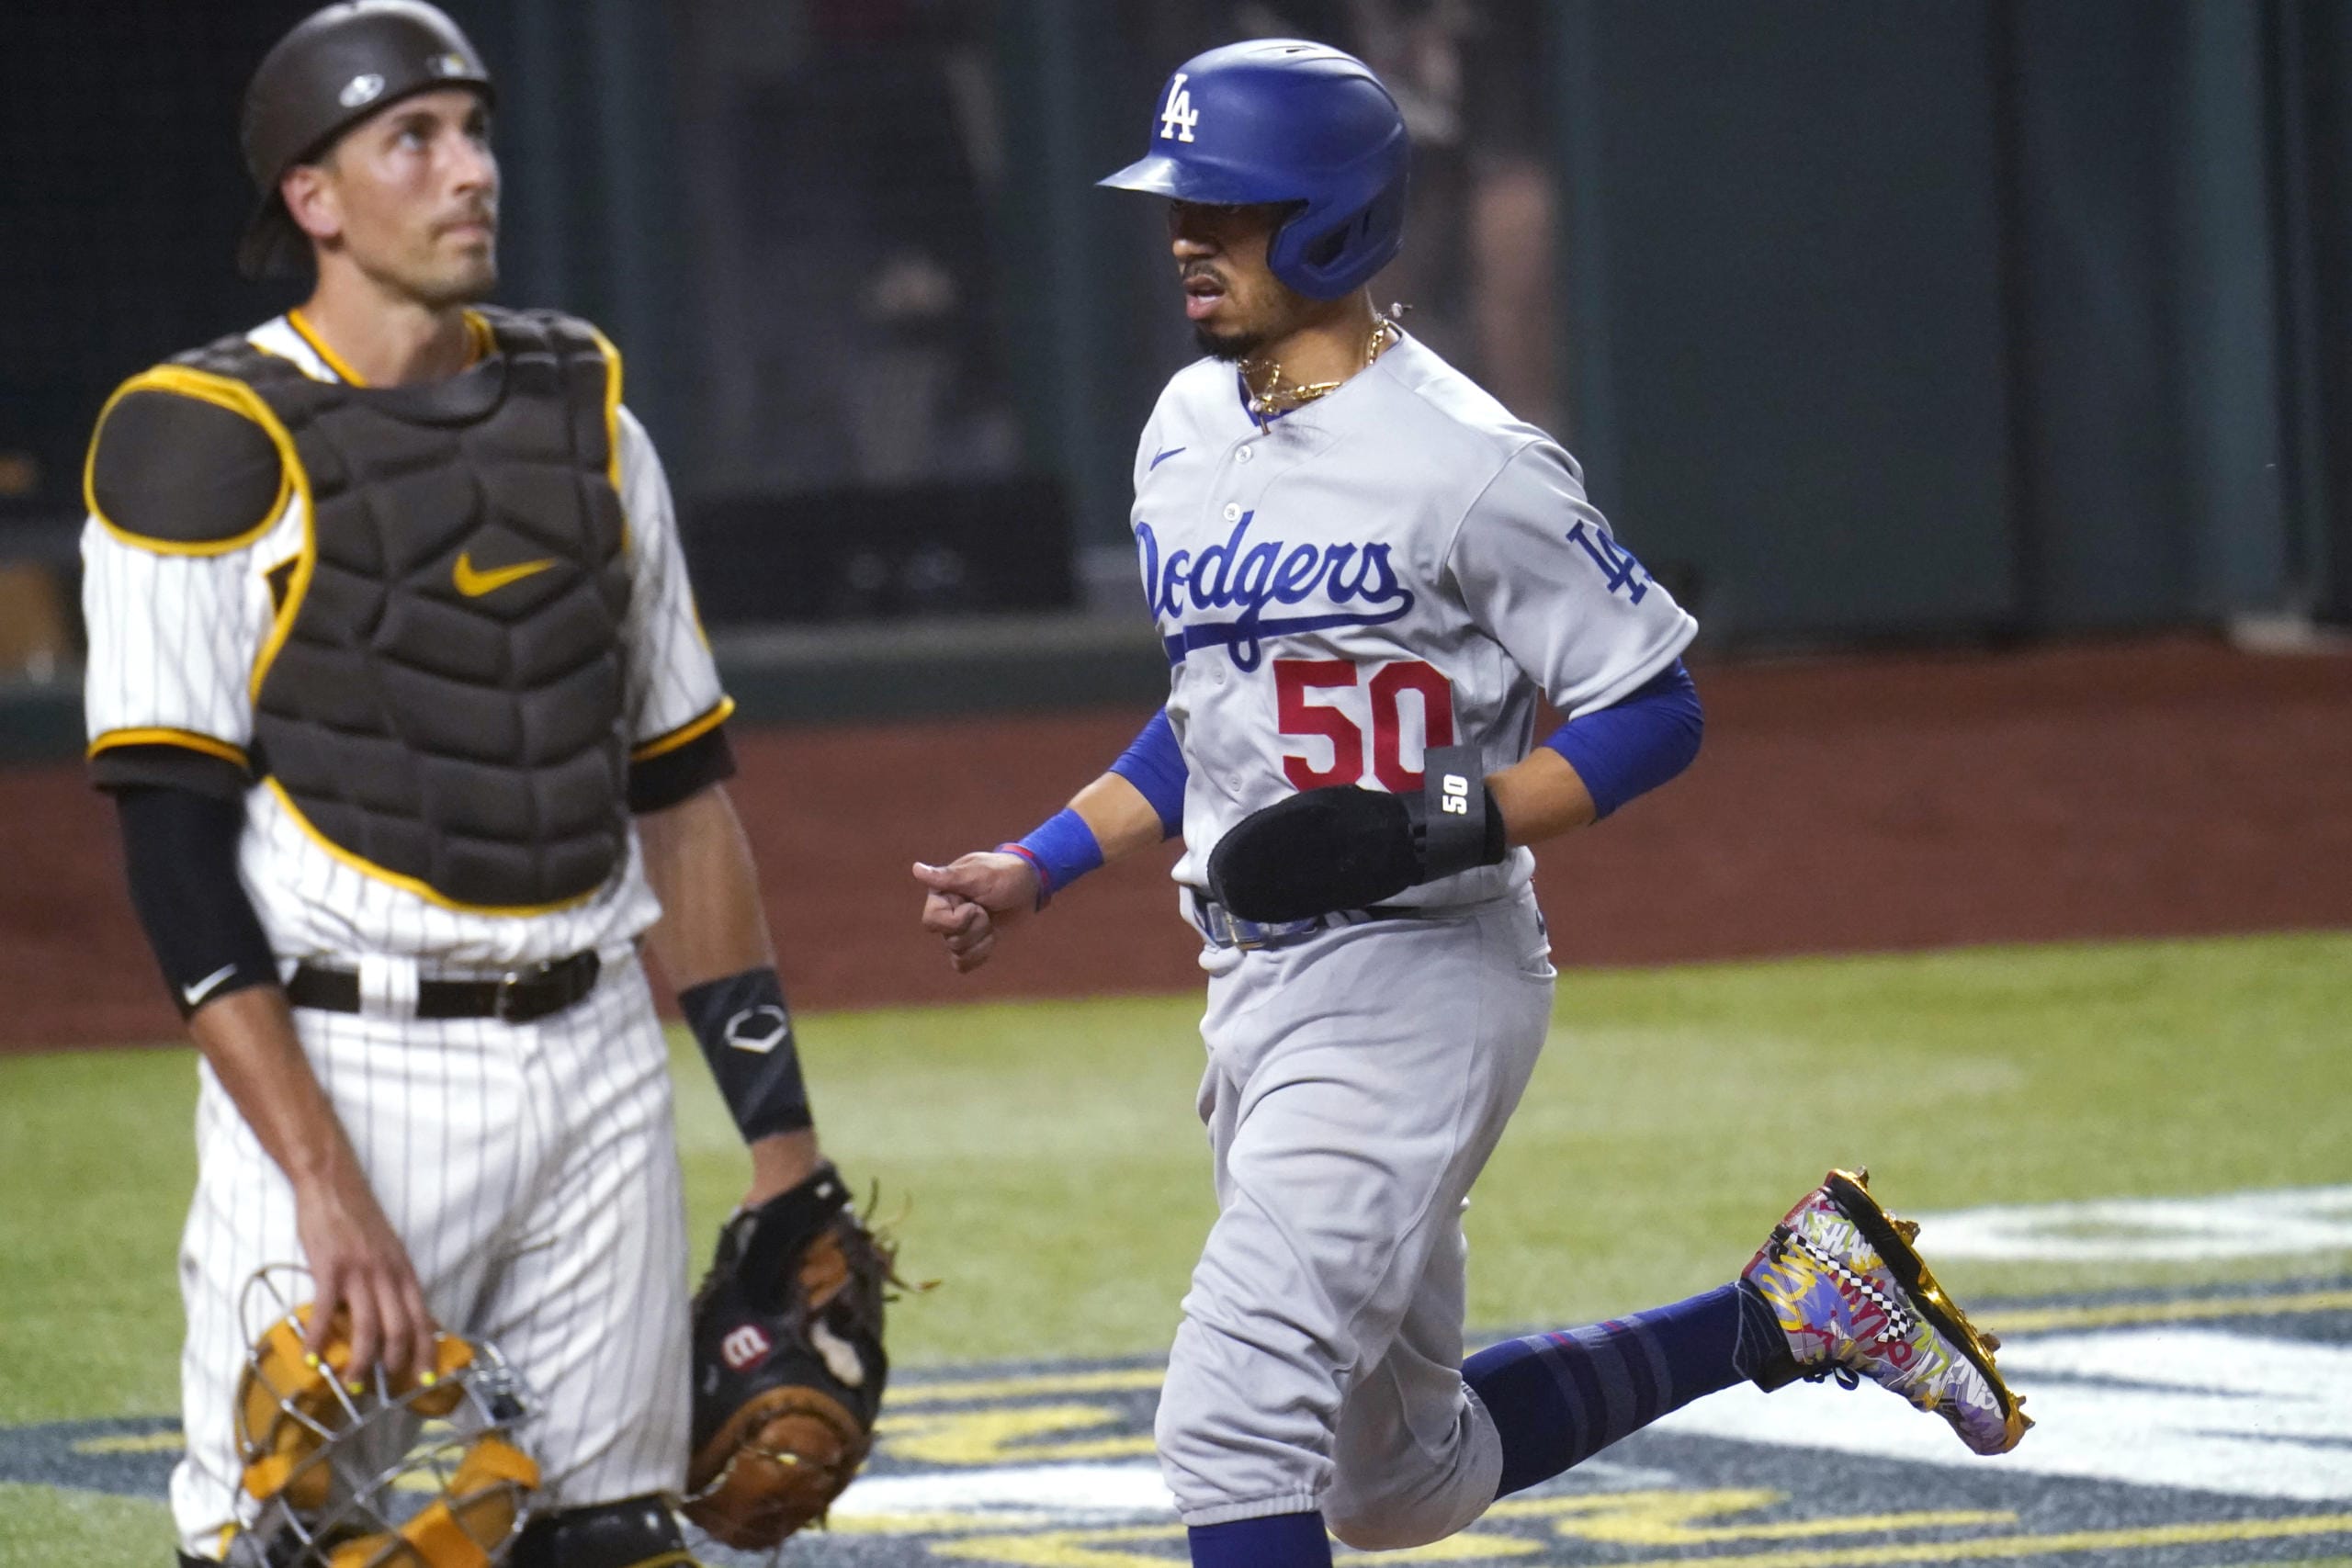 Los Angeles Dodgers' Mookie Betts (50) scores on a throwing error by San Diego Padres' Fernando Tatis Jr. during the third inning in Game 3 of a baseball National League Division Series Thursday, Oct. 8, 2020, in Arlington, Texas. At left is San Diego Padres catcher Jason Castro.